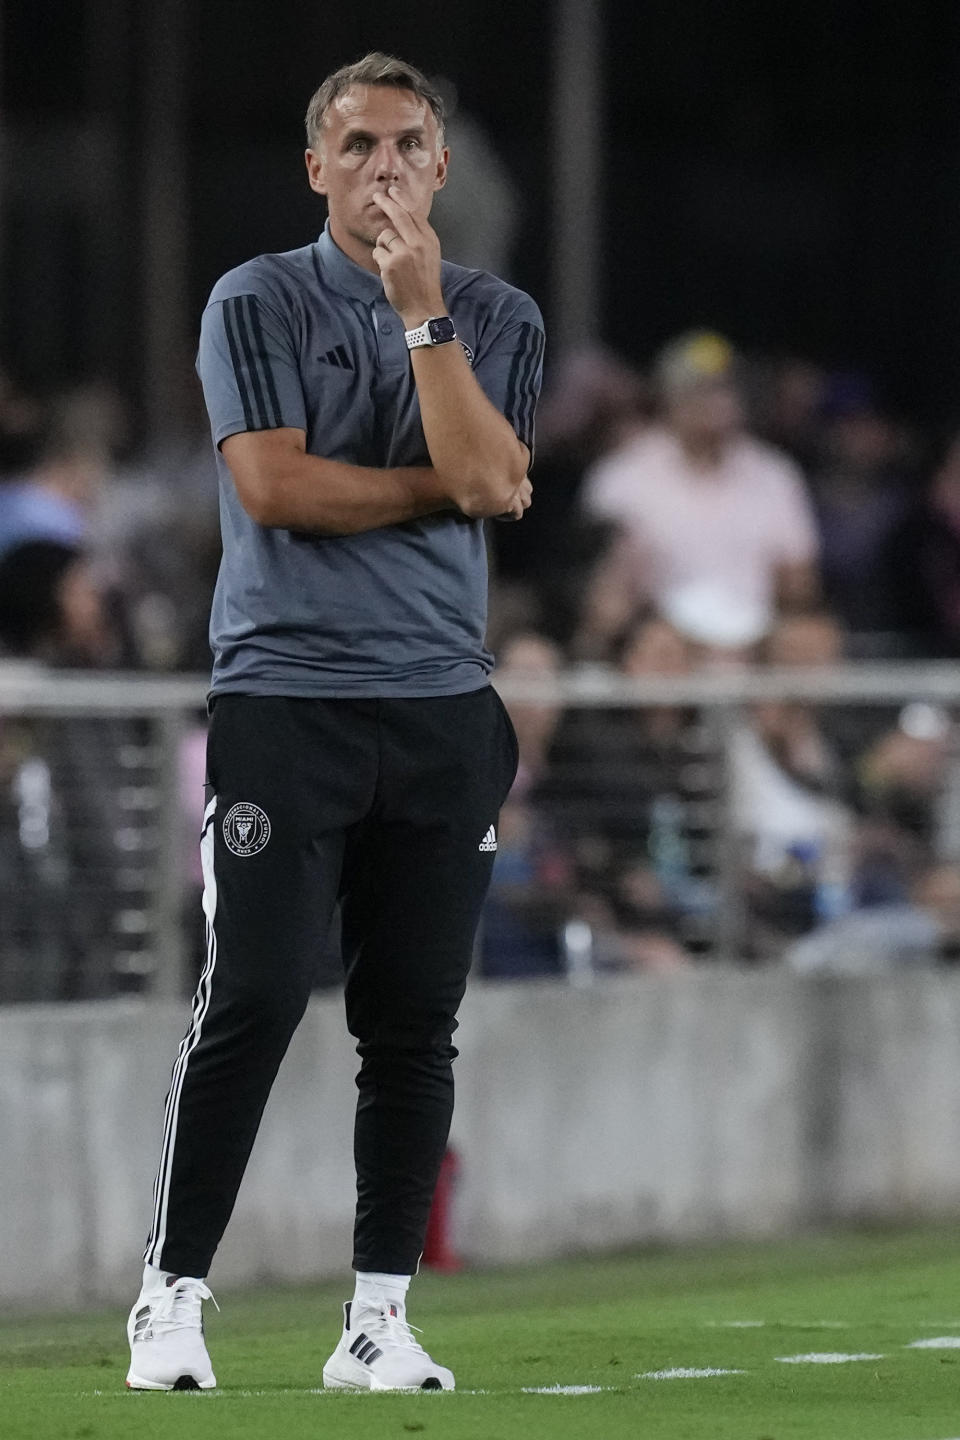 Inter Miami coach Phil Neville watches from the sideline during the first half of the team's MLS soccer match against the New York Red Bulls, Wednesday, May 31, 2023, in Fort Lauderdale, Fla. (AP Photo/Rebecca Blackwell)